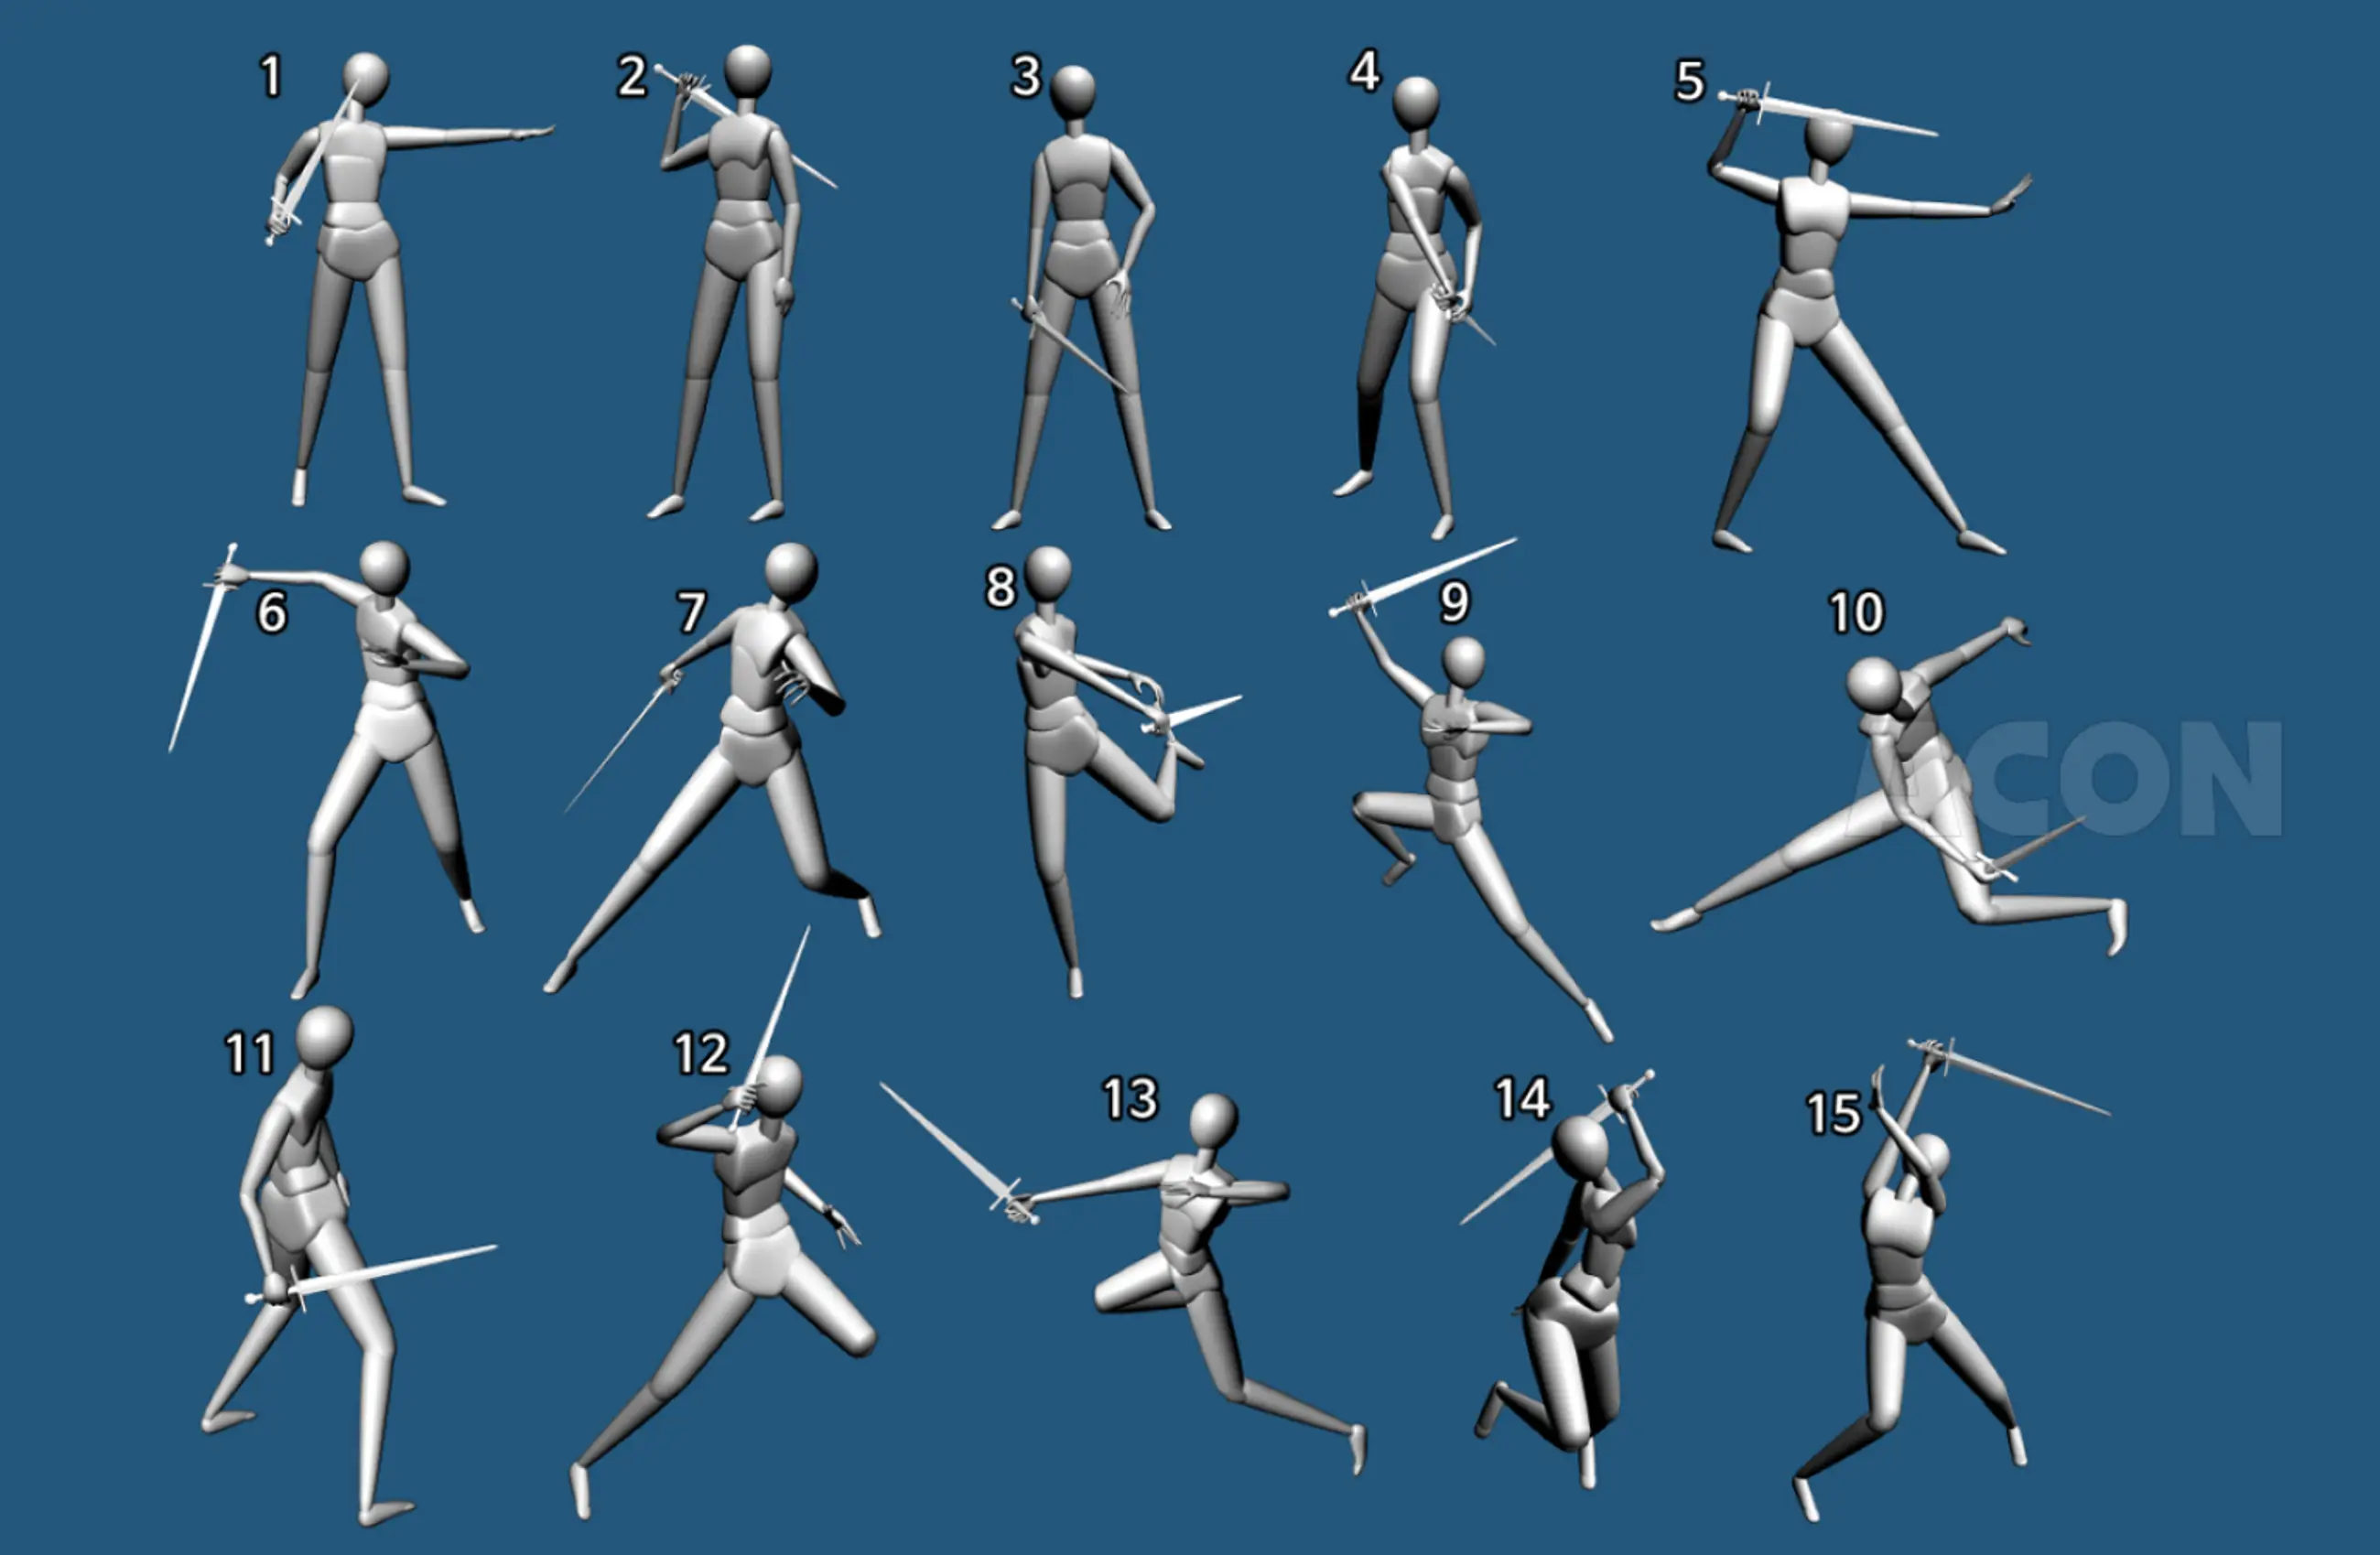 sword fighting poses reference